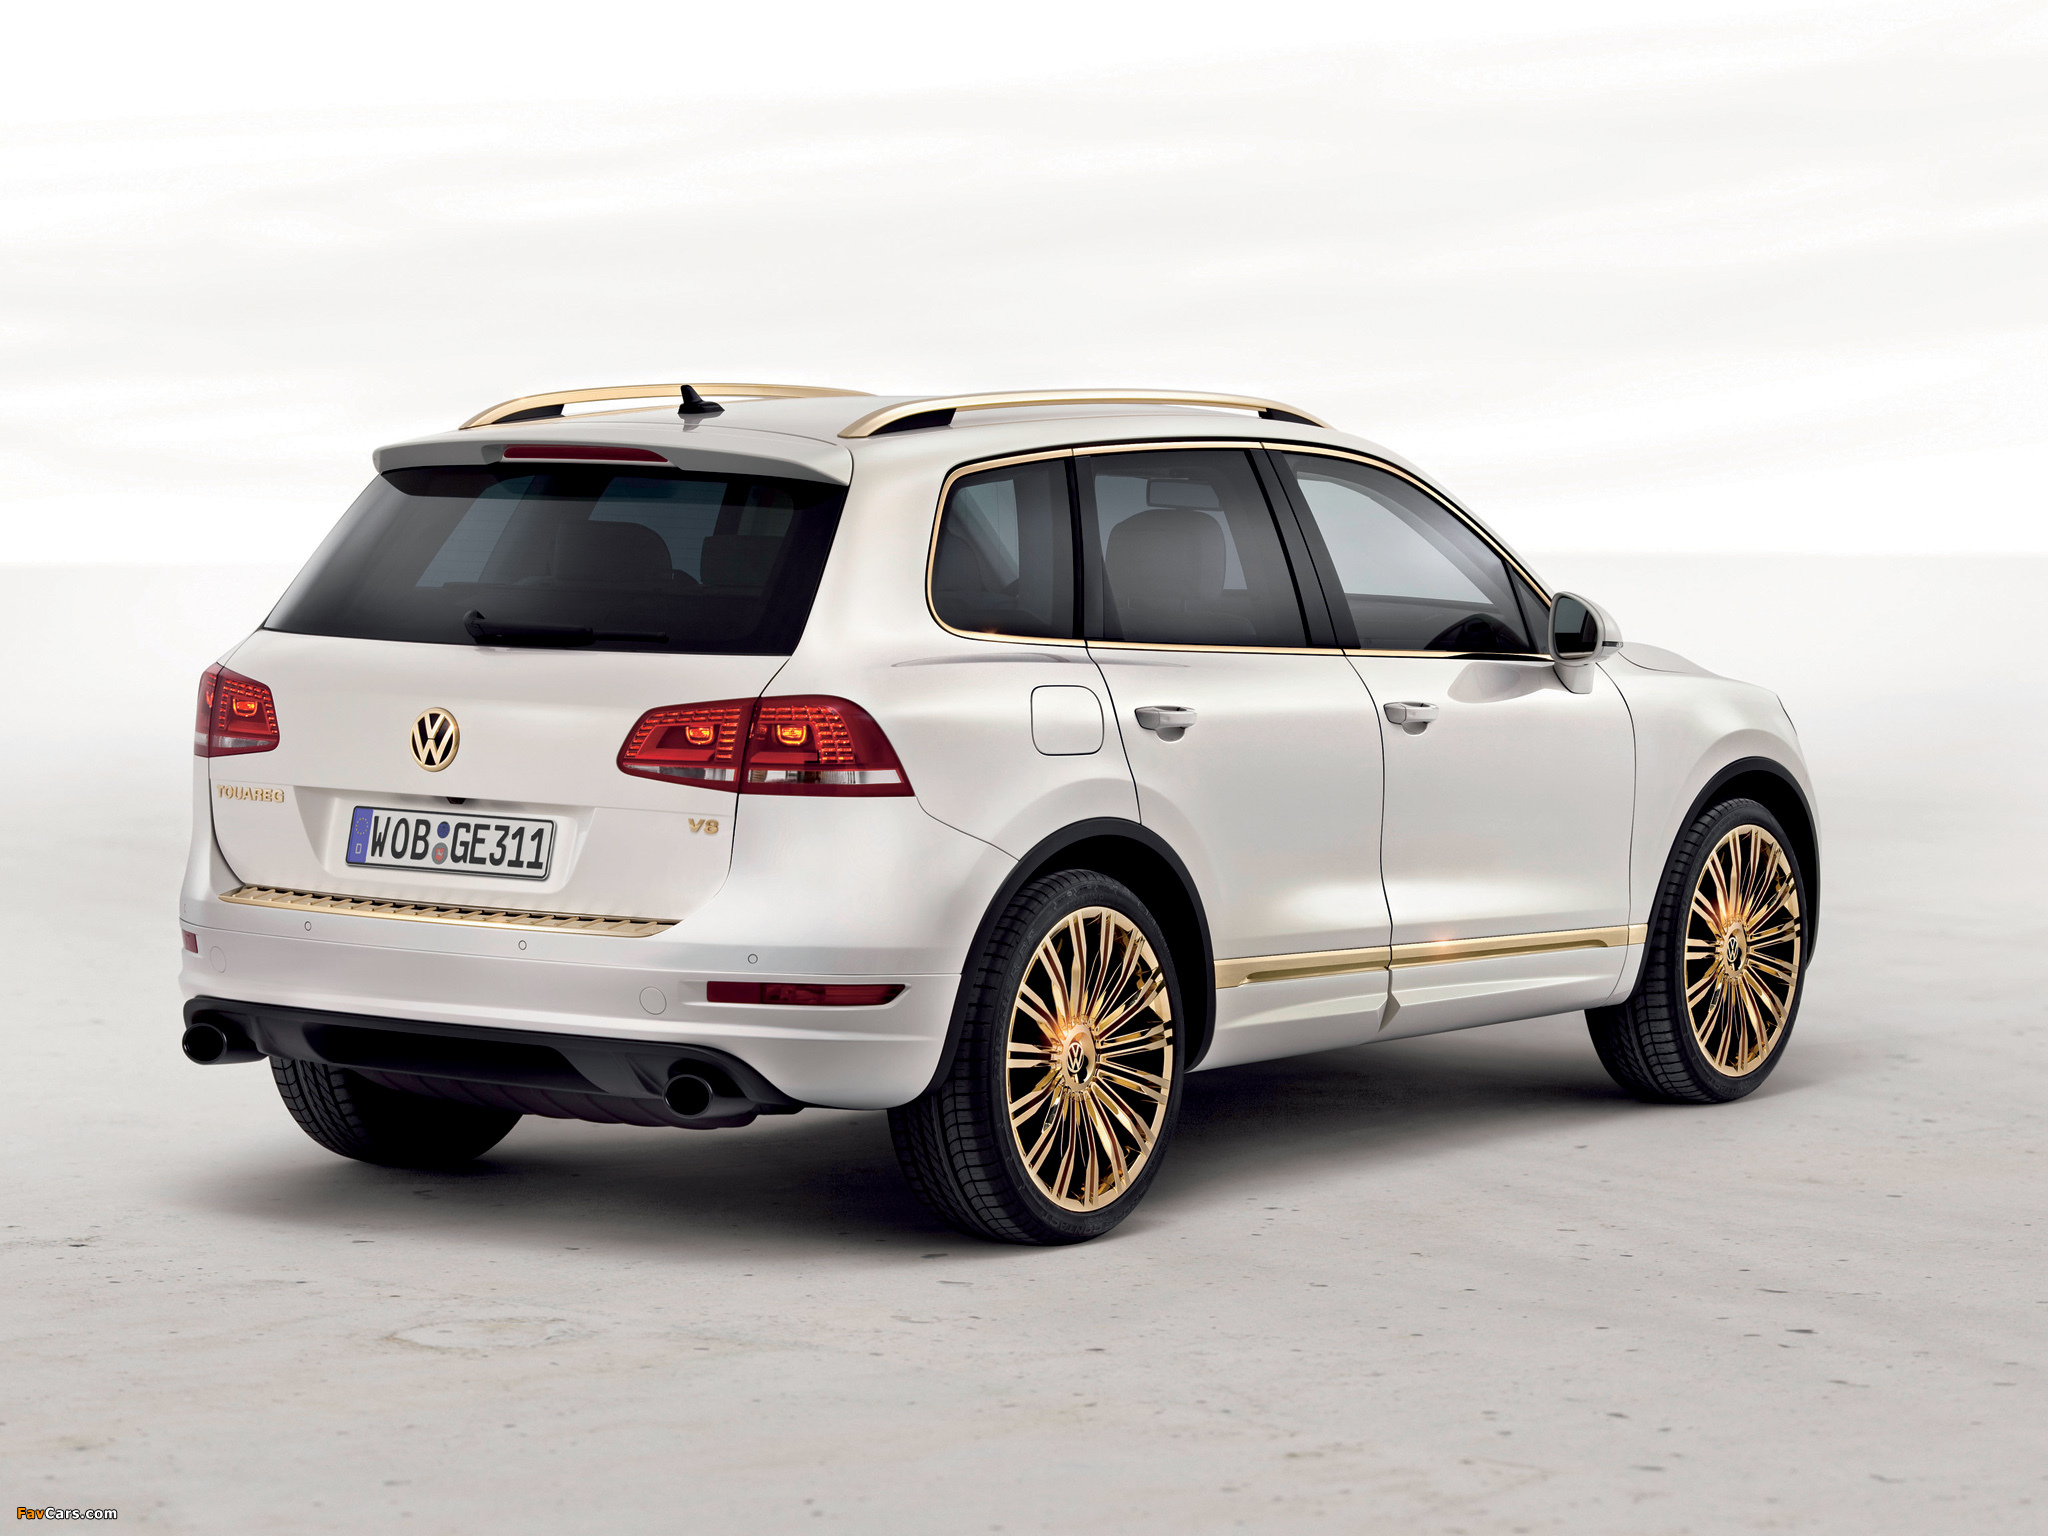 Volkswagen Touareg V8 TDI Gold Edition Concept 2011 pictures (2048 x 1536)